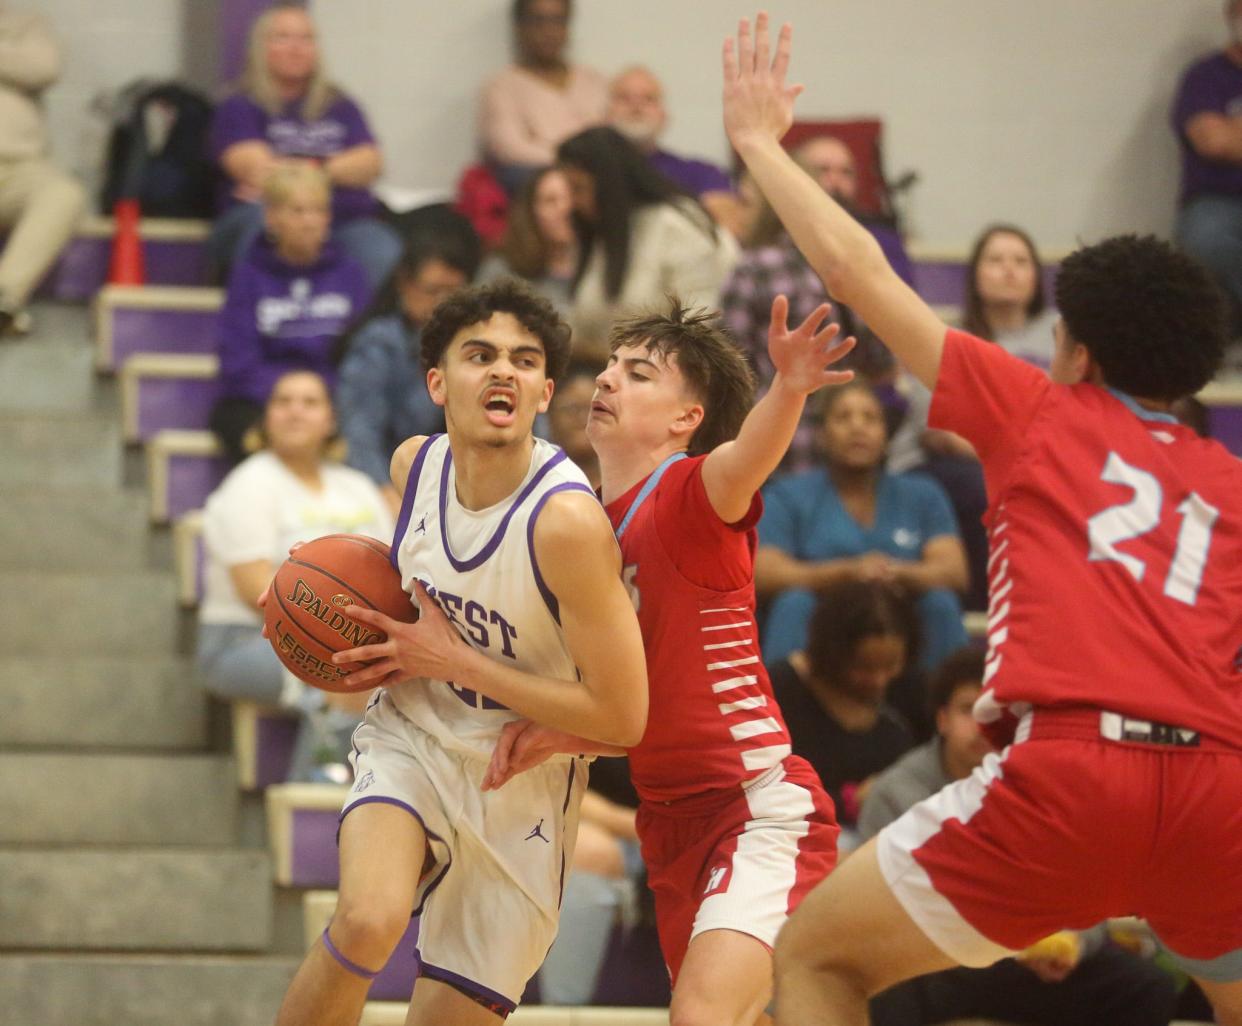 Topeka West’s Jalen Foy drives to the rim against Shawnee Heights on Tuesday, Feb. 6. The Thunderbirds defeated the Chargers 58-30.